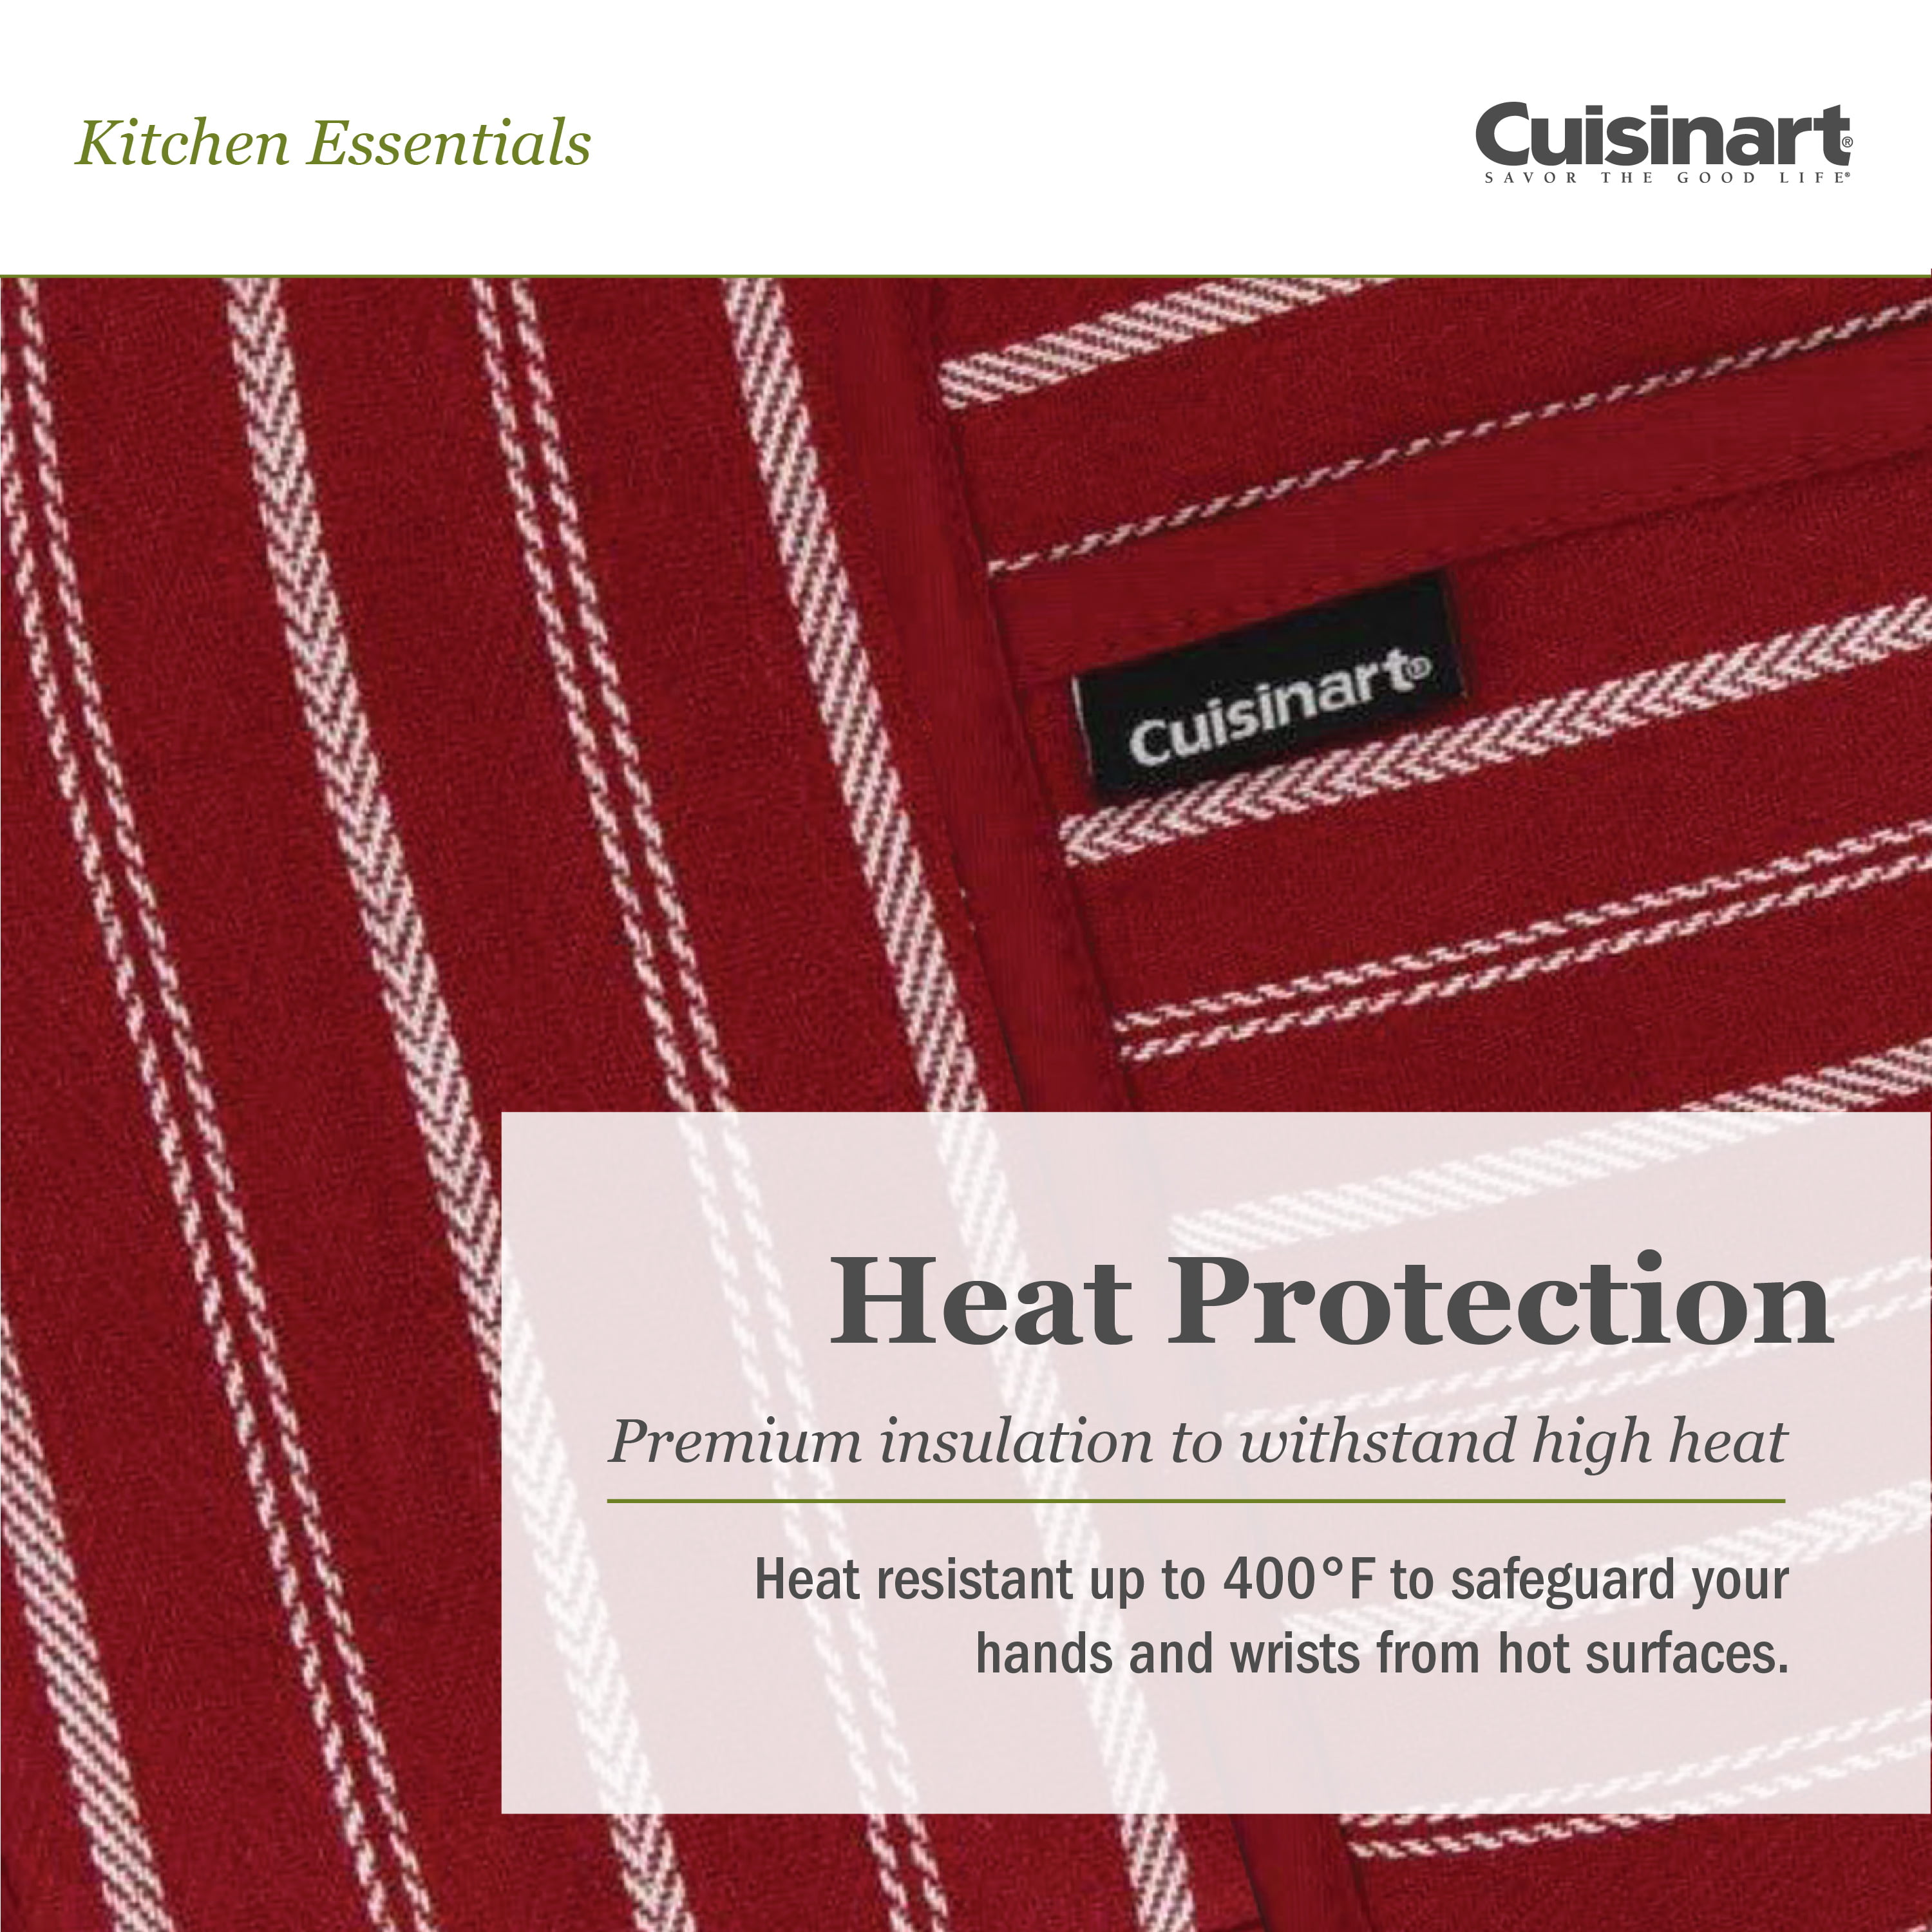 Cuisinart Kitchen Oven Mitt/Glove & Rectangle Potholder with Pocket Set w/Neoprene for Easy Gripping, Heat Resistant Up to 500 Degrees F, Twill